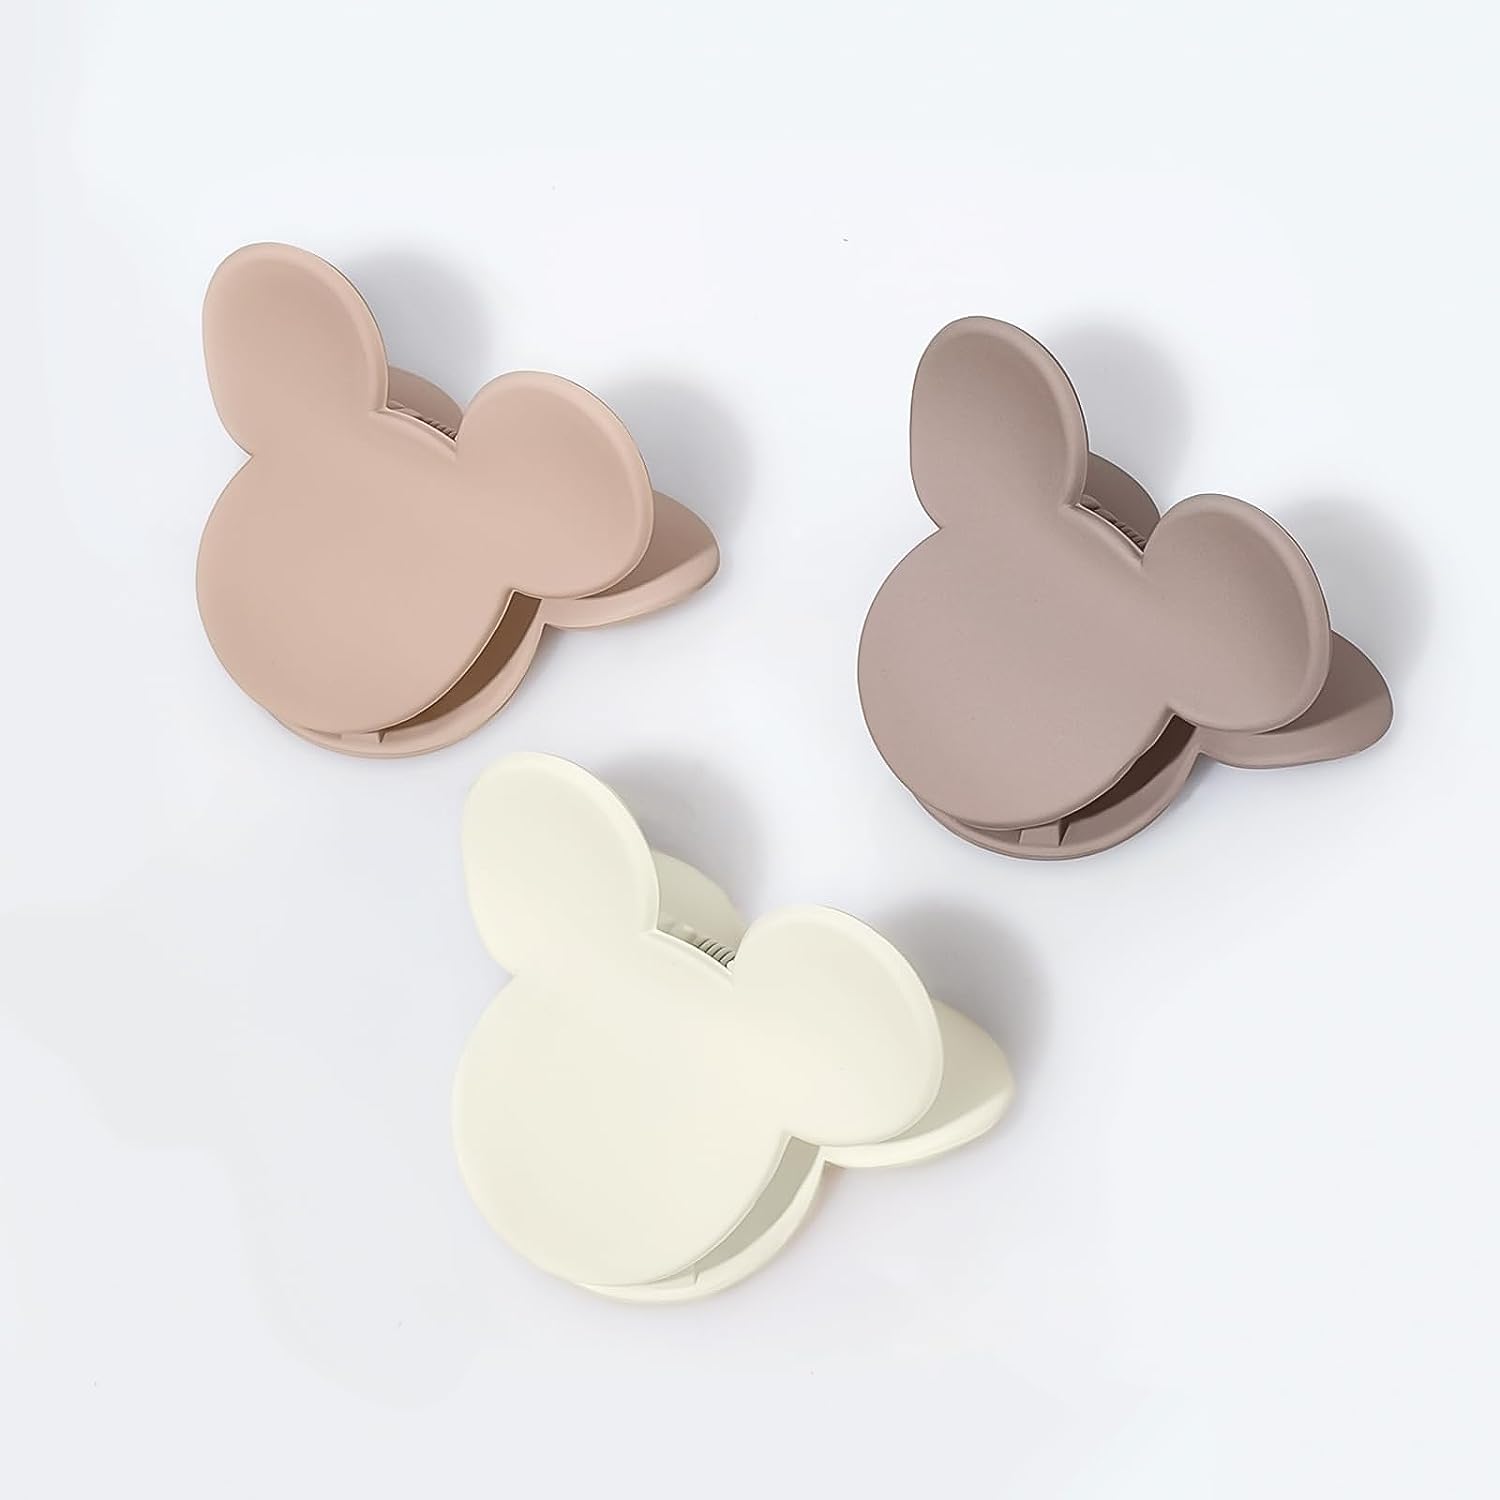 4 Pcs Hair Claw Clips Small Mouse Ear Hair Clips Matte 2.5'' Non-Slip Jaw Clips for Thin and Medium Hair Hair Accessories for Women Girls